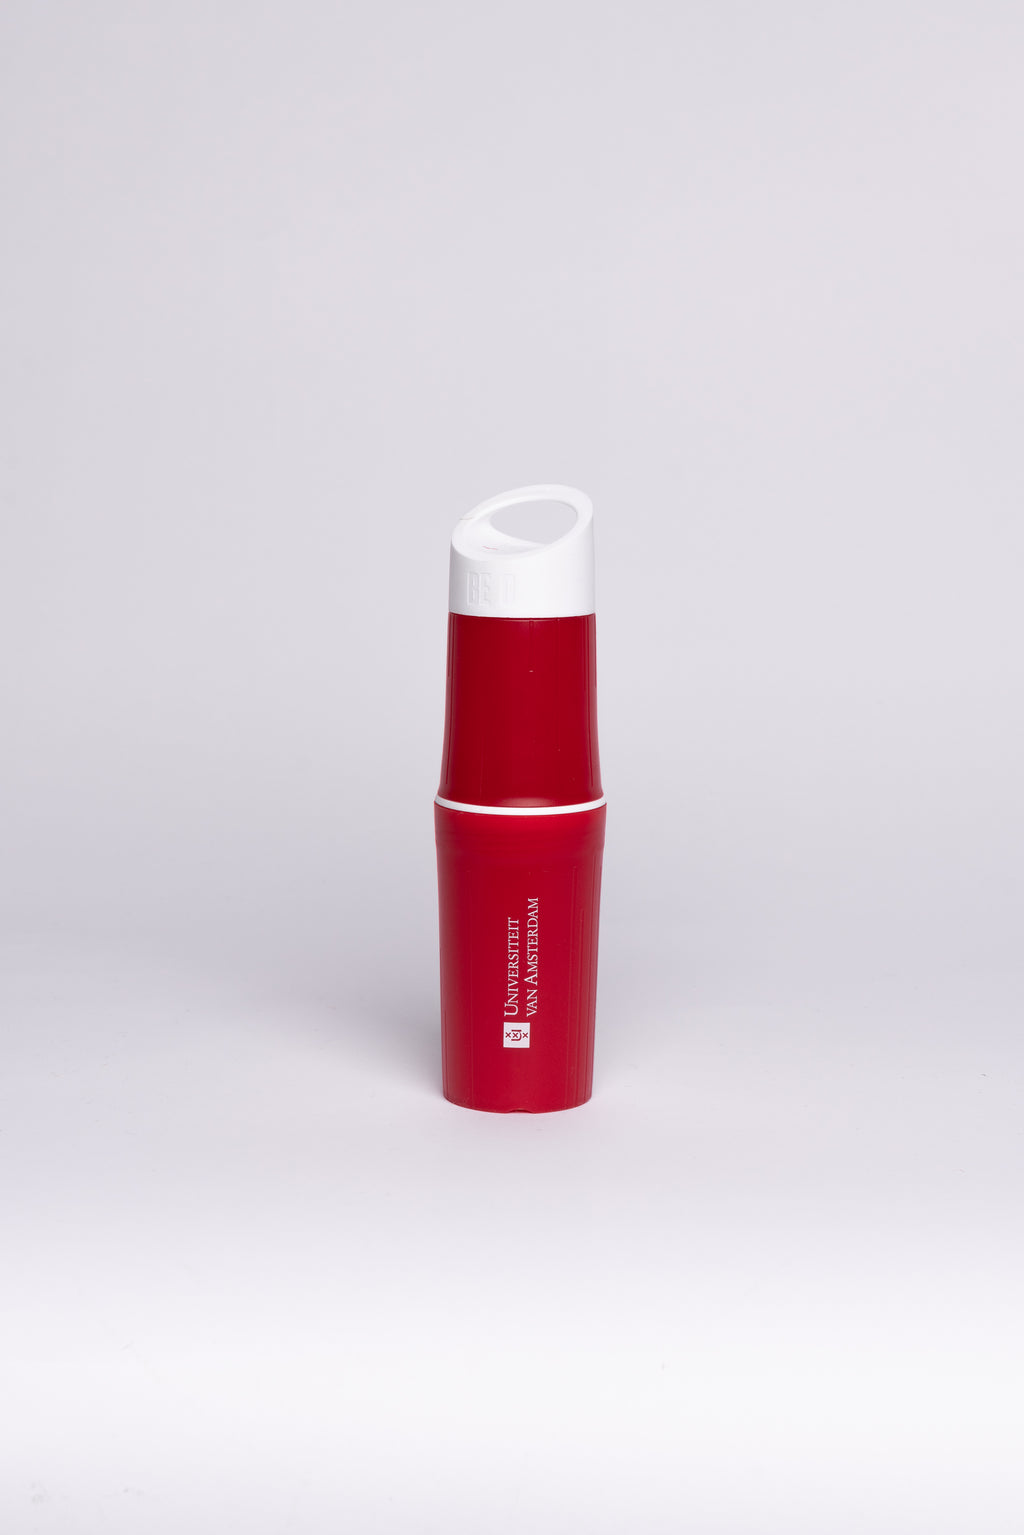 Reusable water bottle with the University of Amsterdam logo of BE O in multiple colors